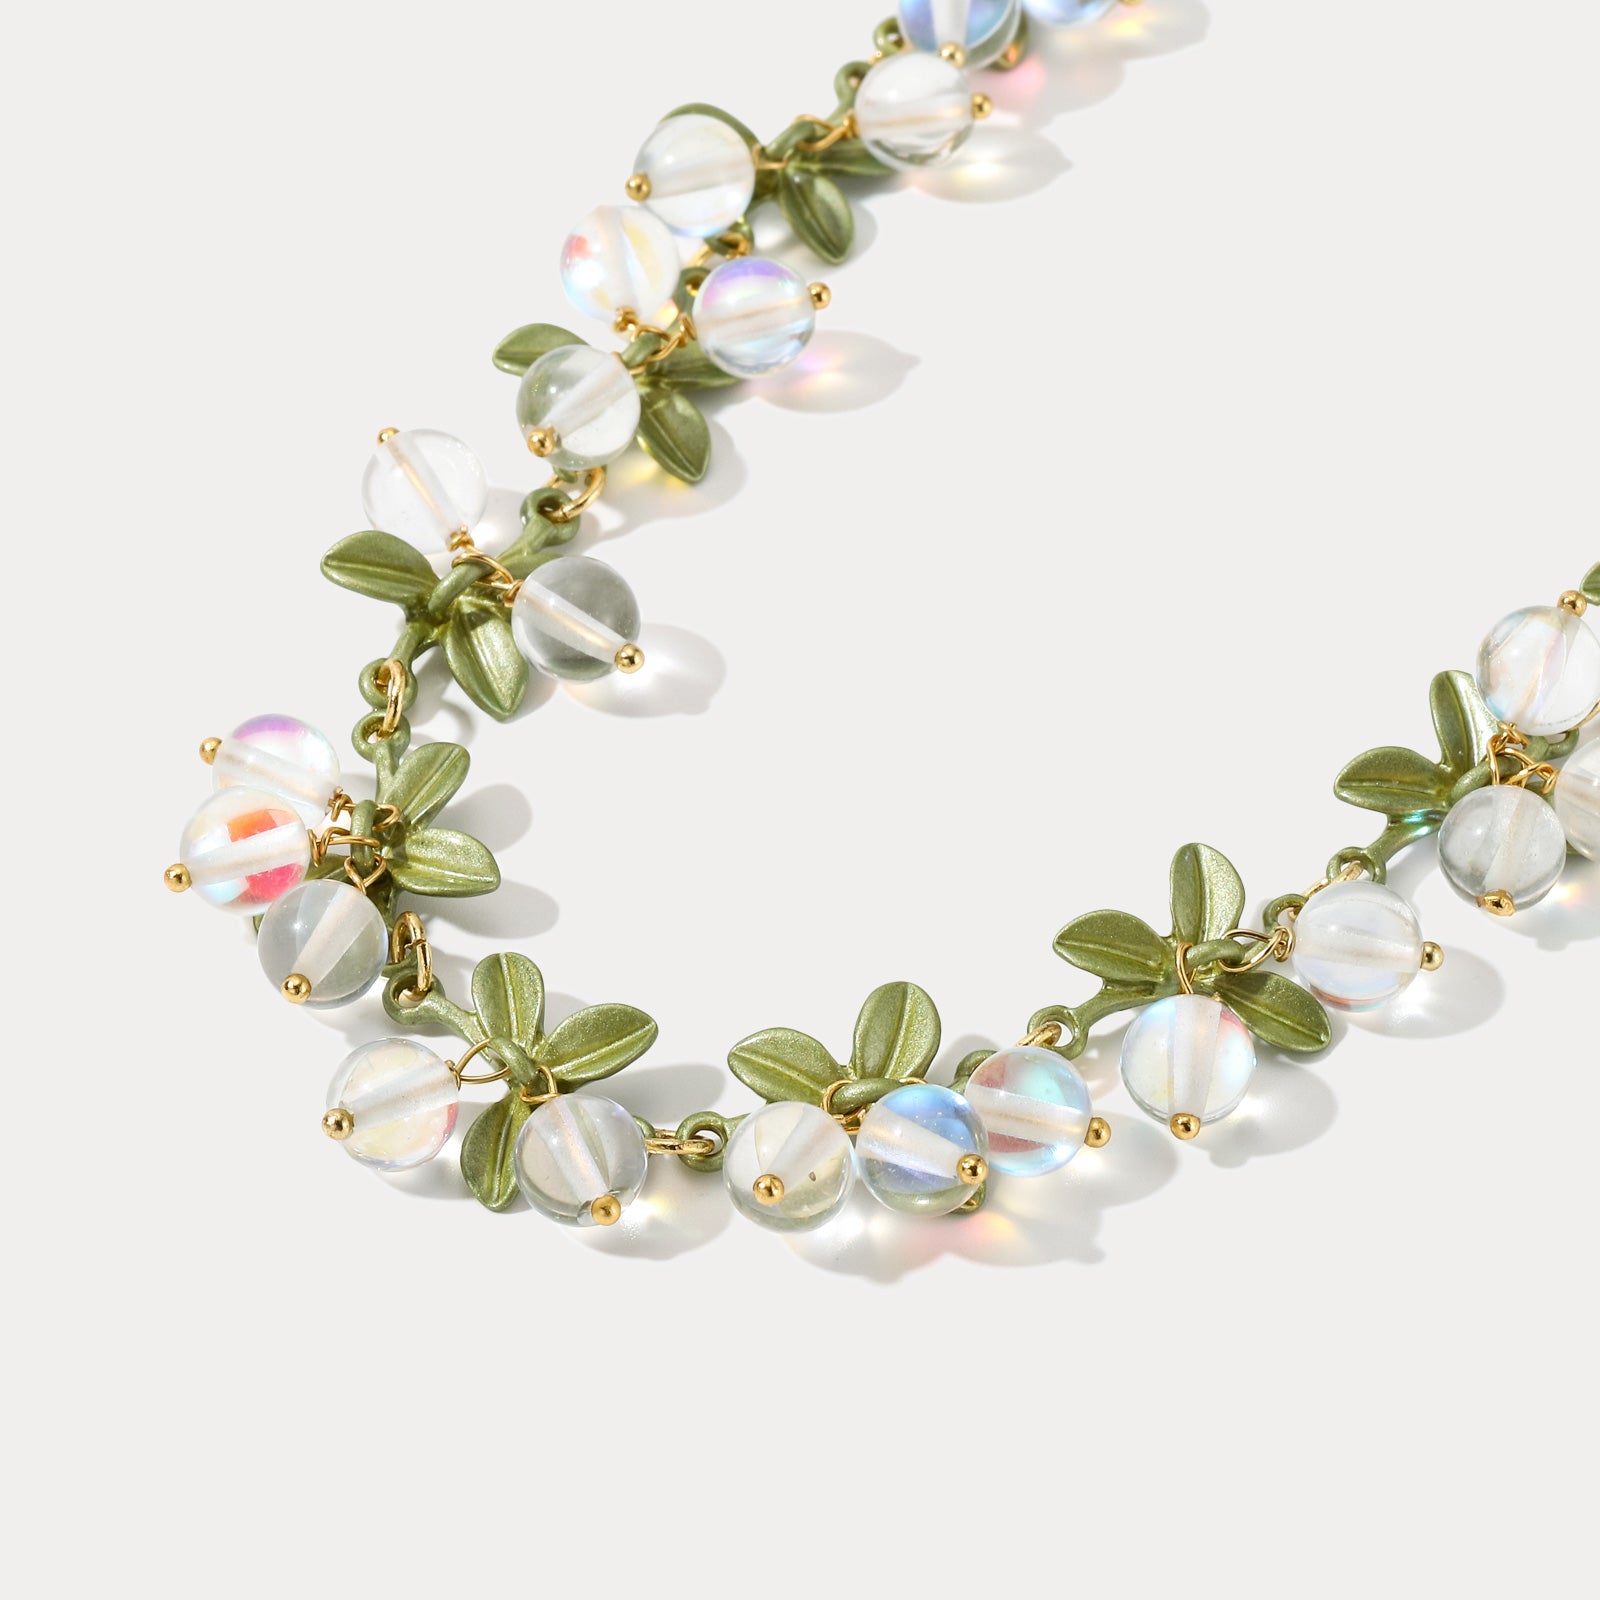 White Currant Berry Necklace